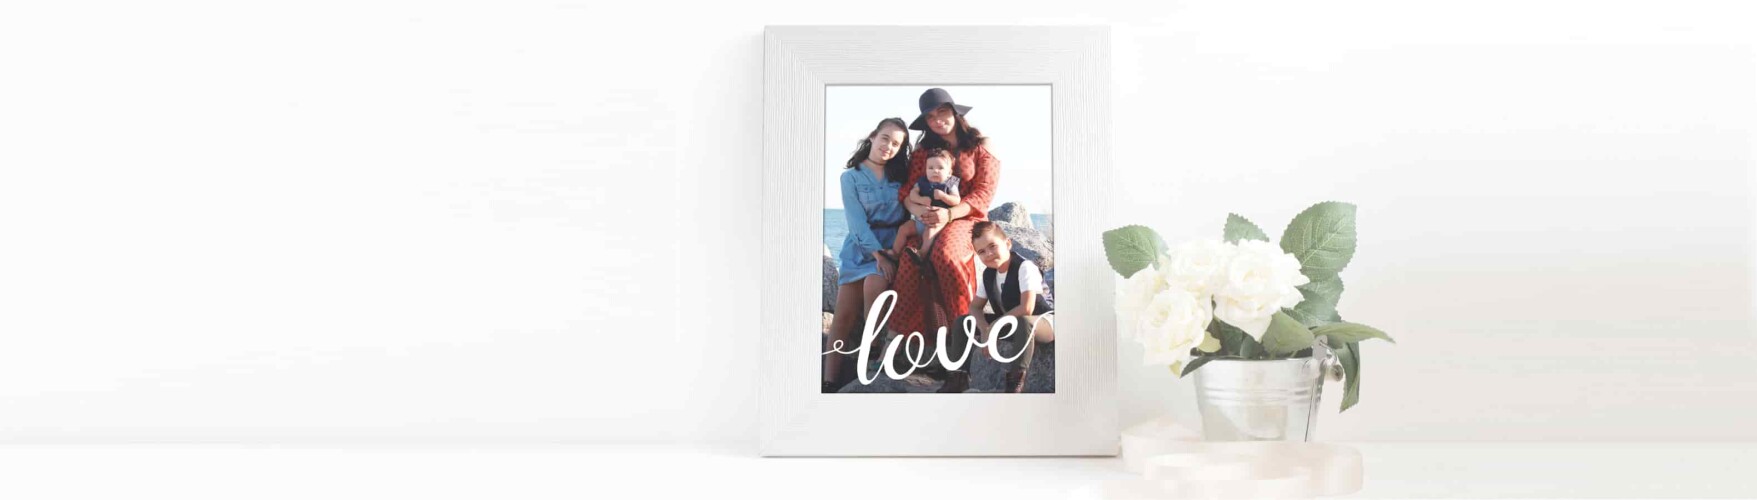 Personalized Photo Cards - The perfect card!